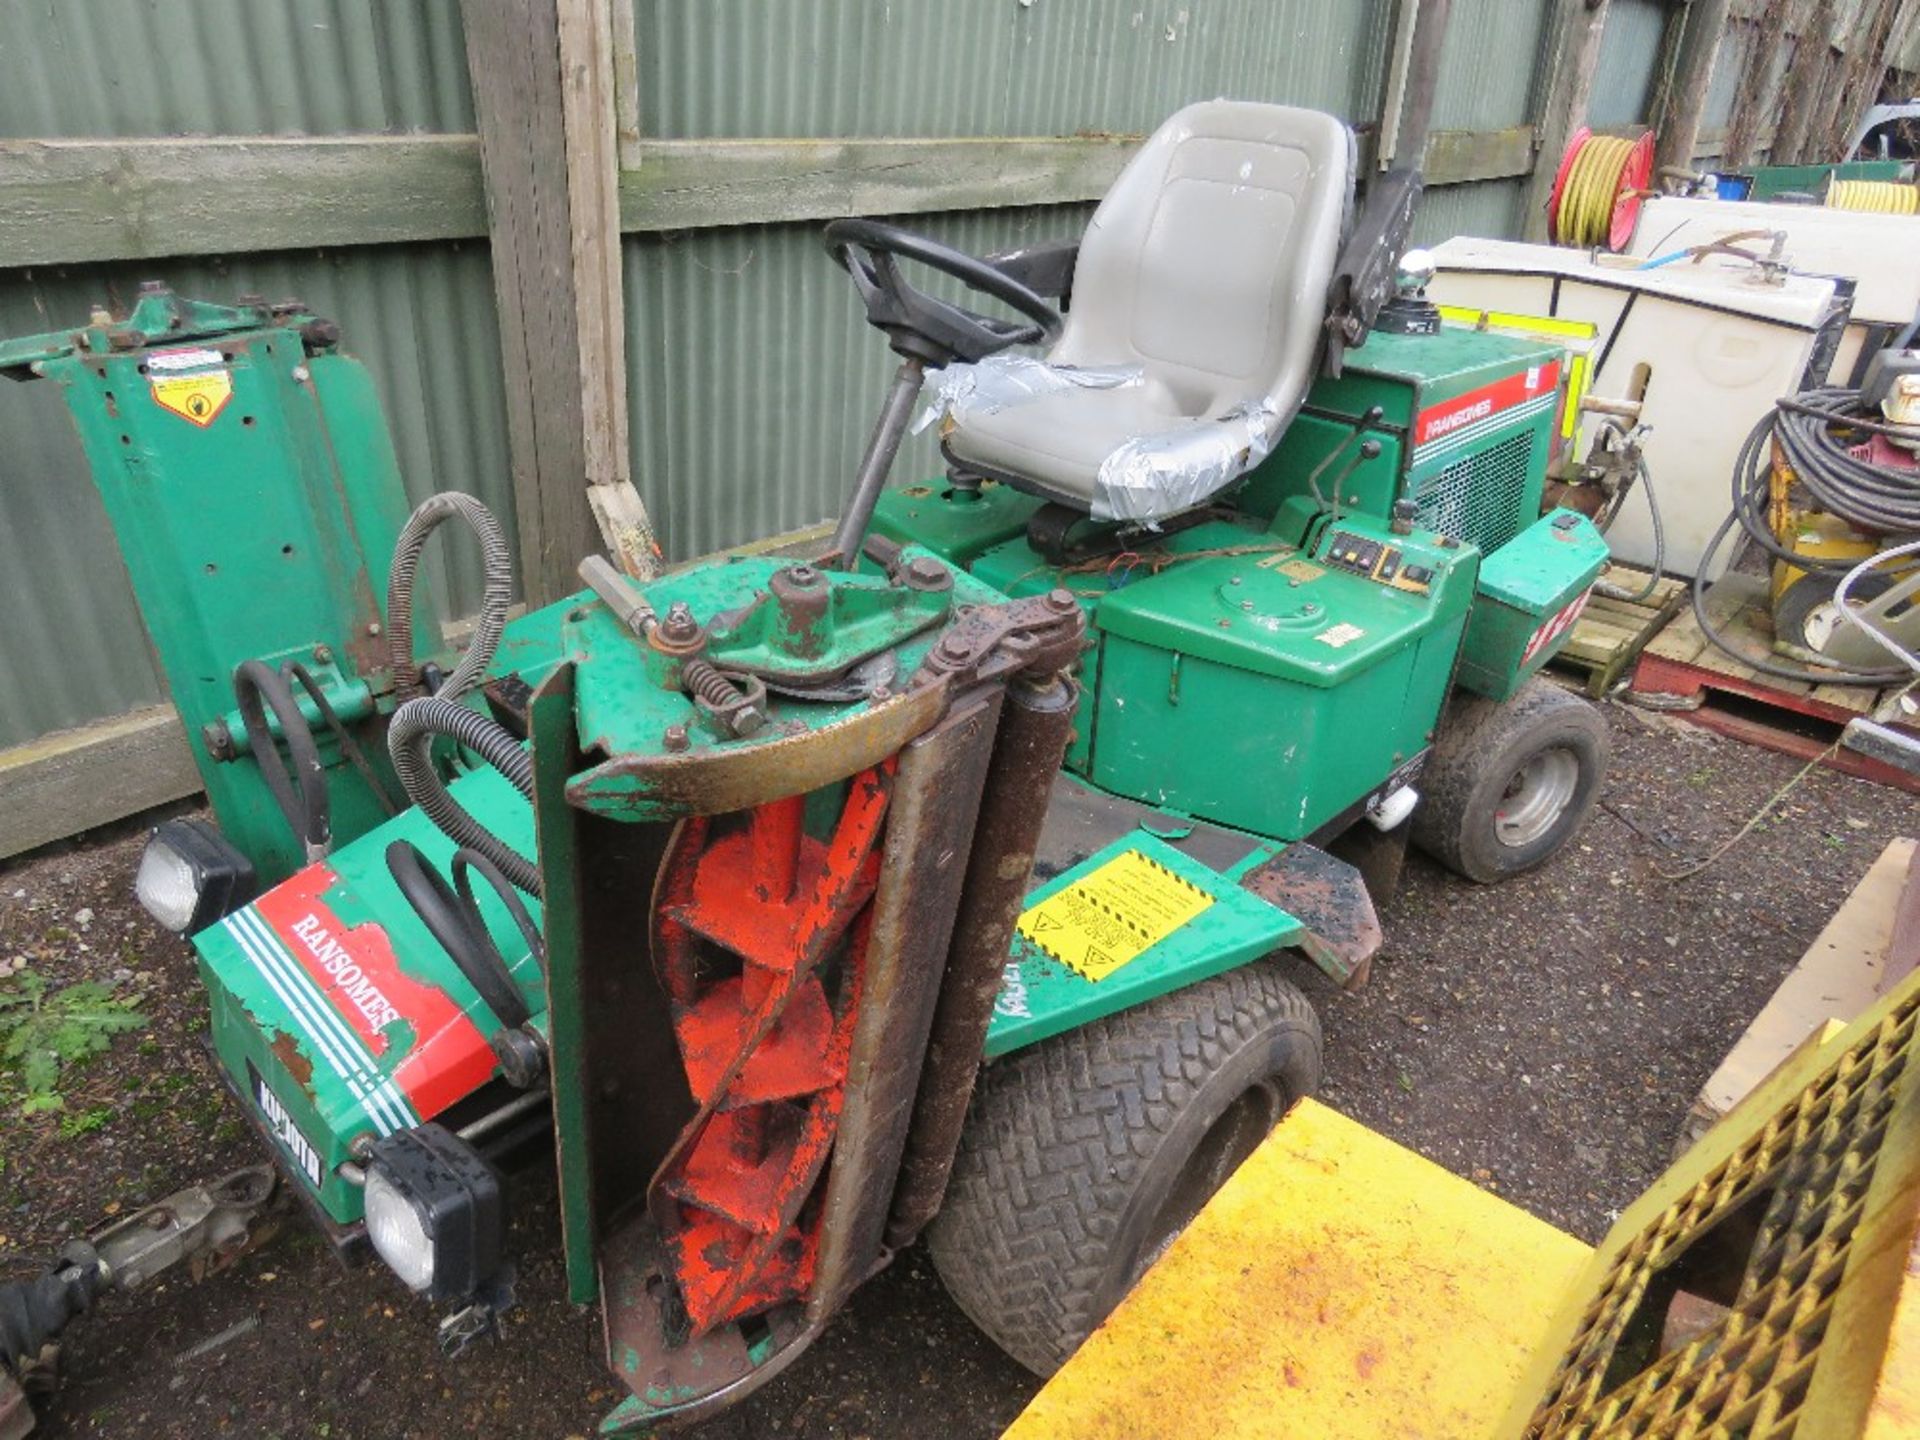 RANSOMES 213 TRIPLE RIDE ON CYLINDER MOWER WITH KUBOTA ENGINE. WHEN TESTED WAS SEEN TO RUN, DRIVE, M